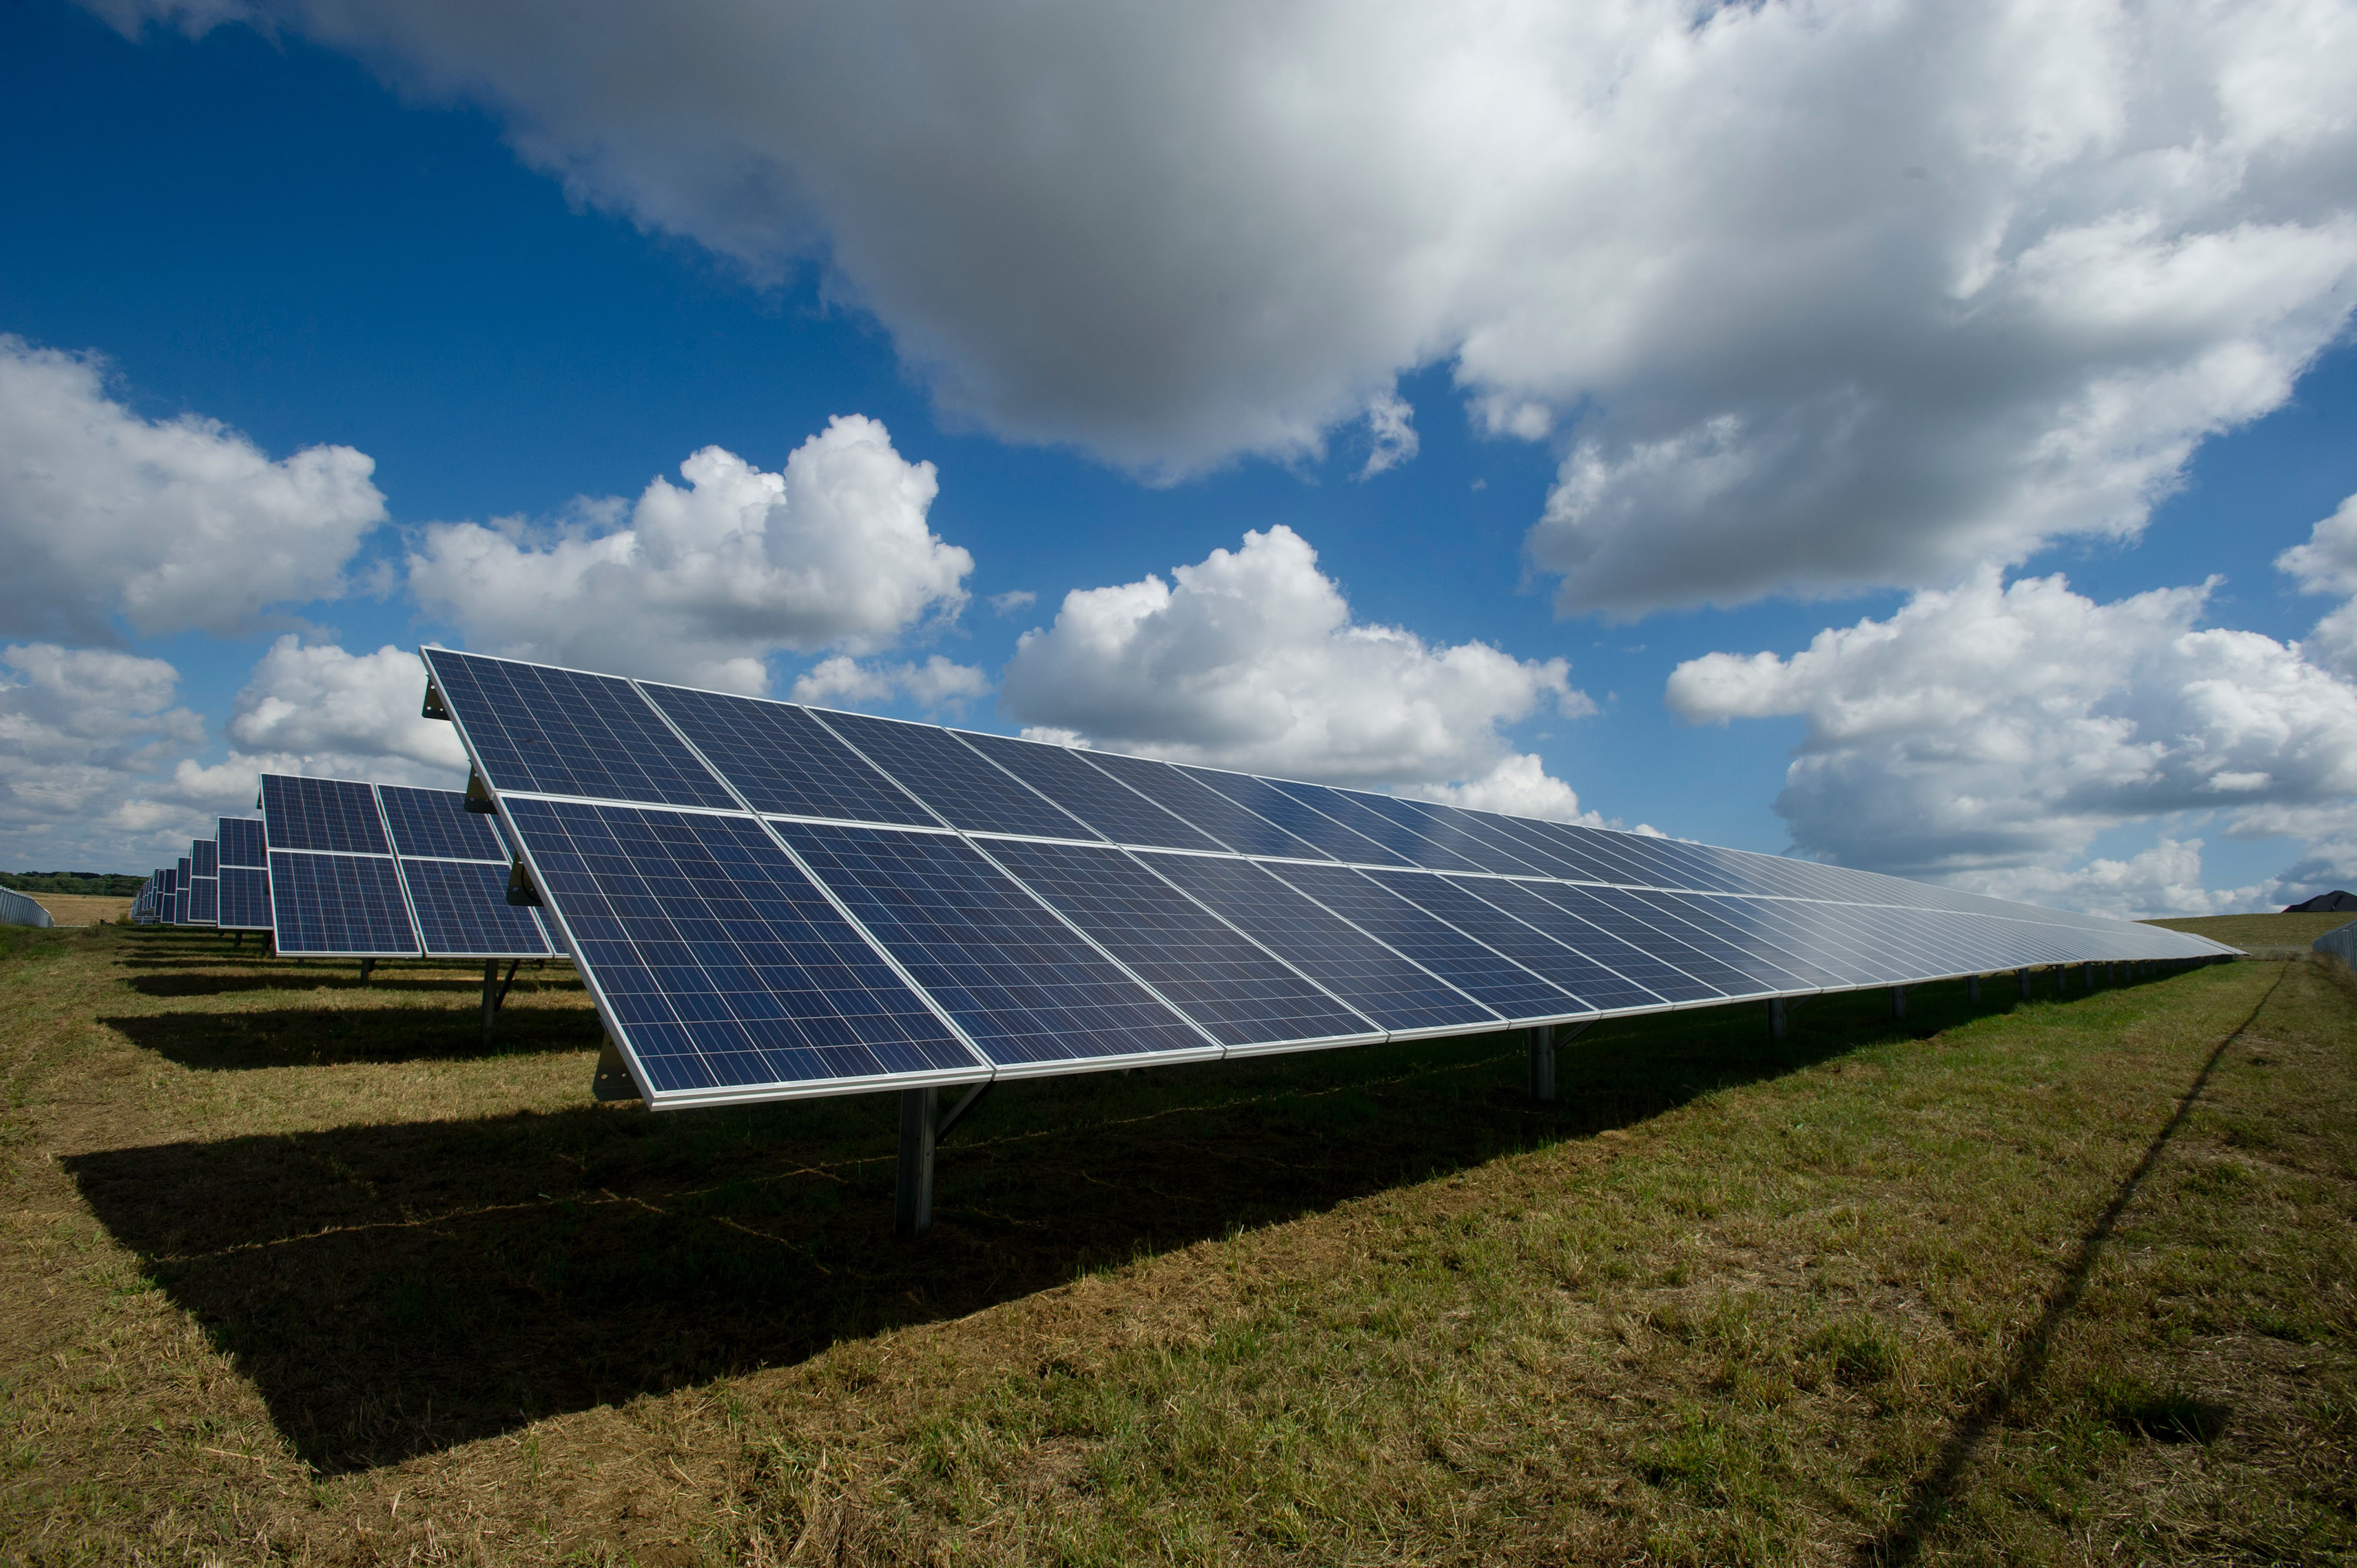 A row of solar panels in a field under a blue sky dotted with white clouds. 